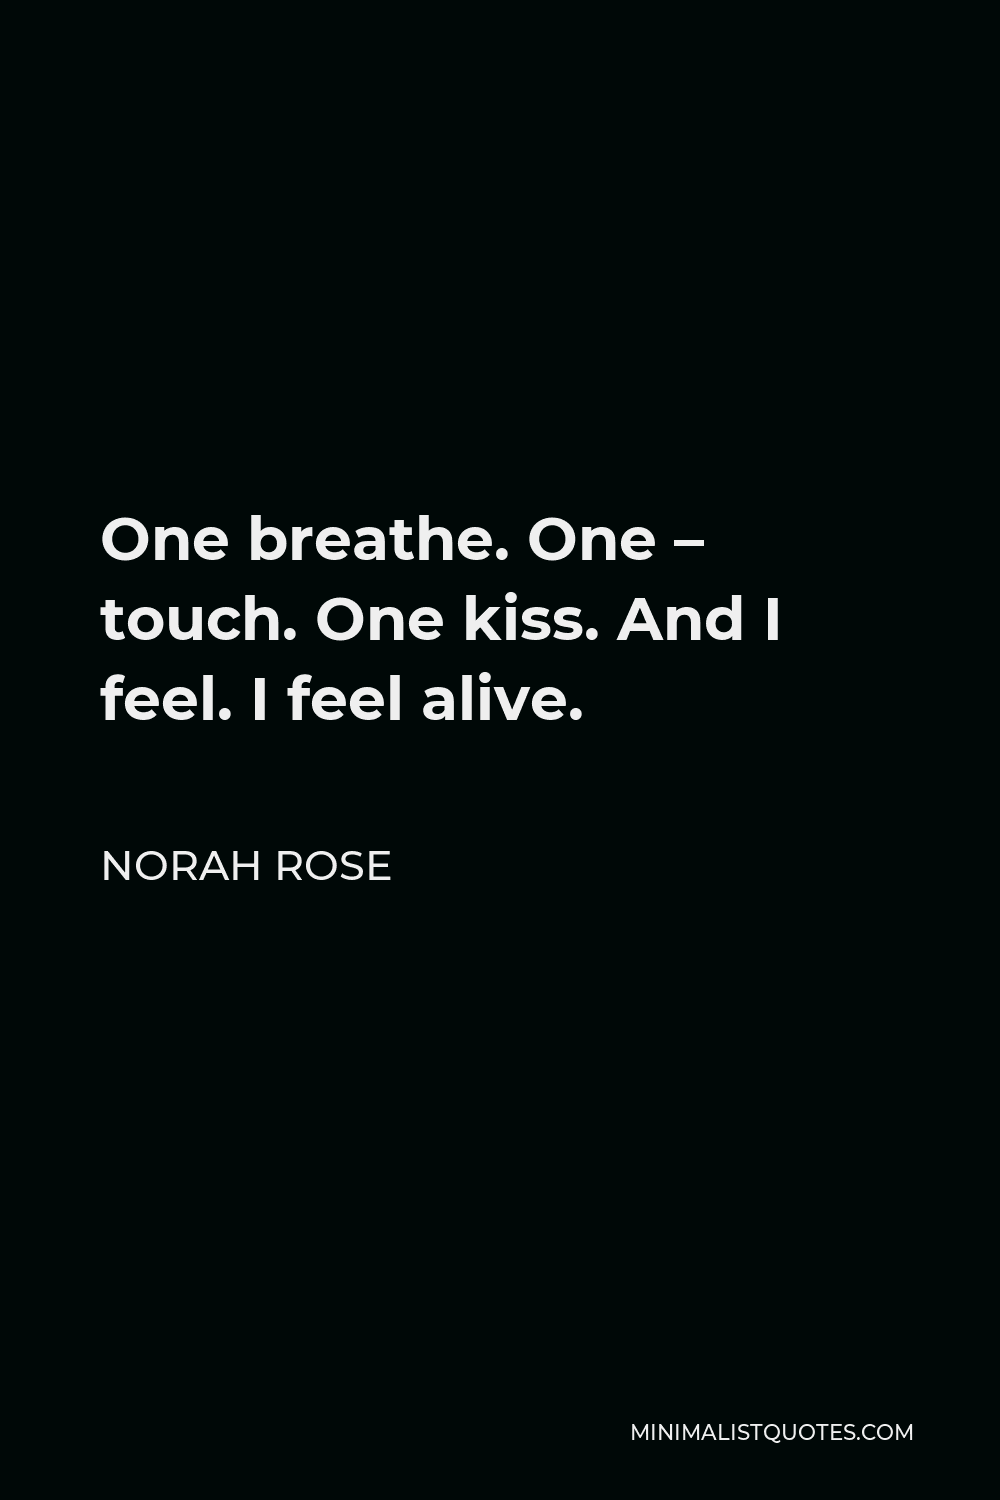 Norah Rose Quote - One breathe. One – touch. One kiss. And I feel. I feel alive.